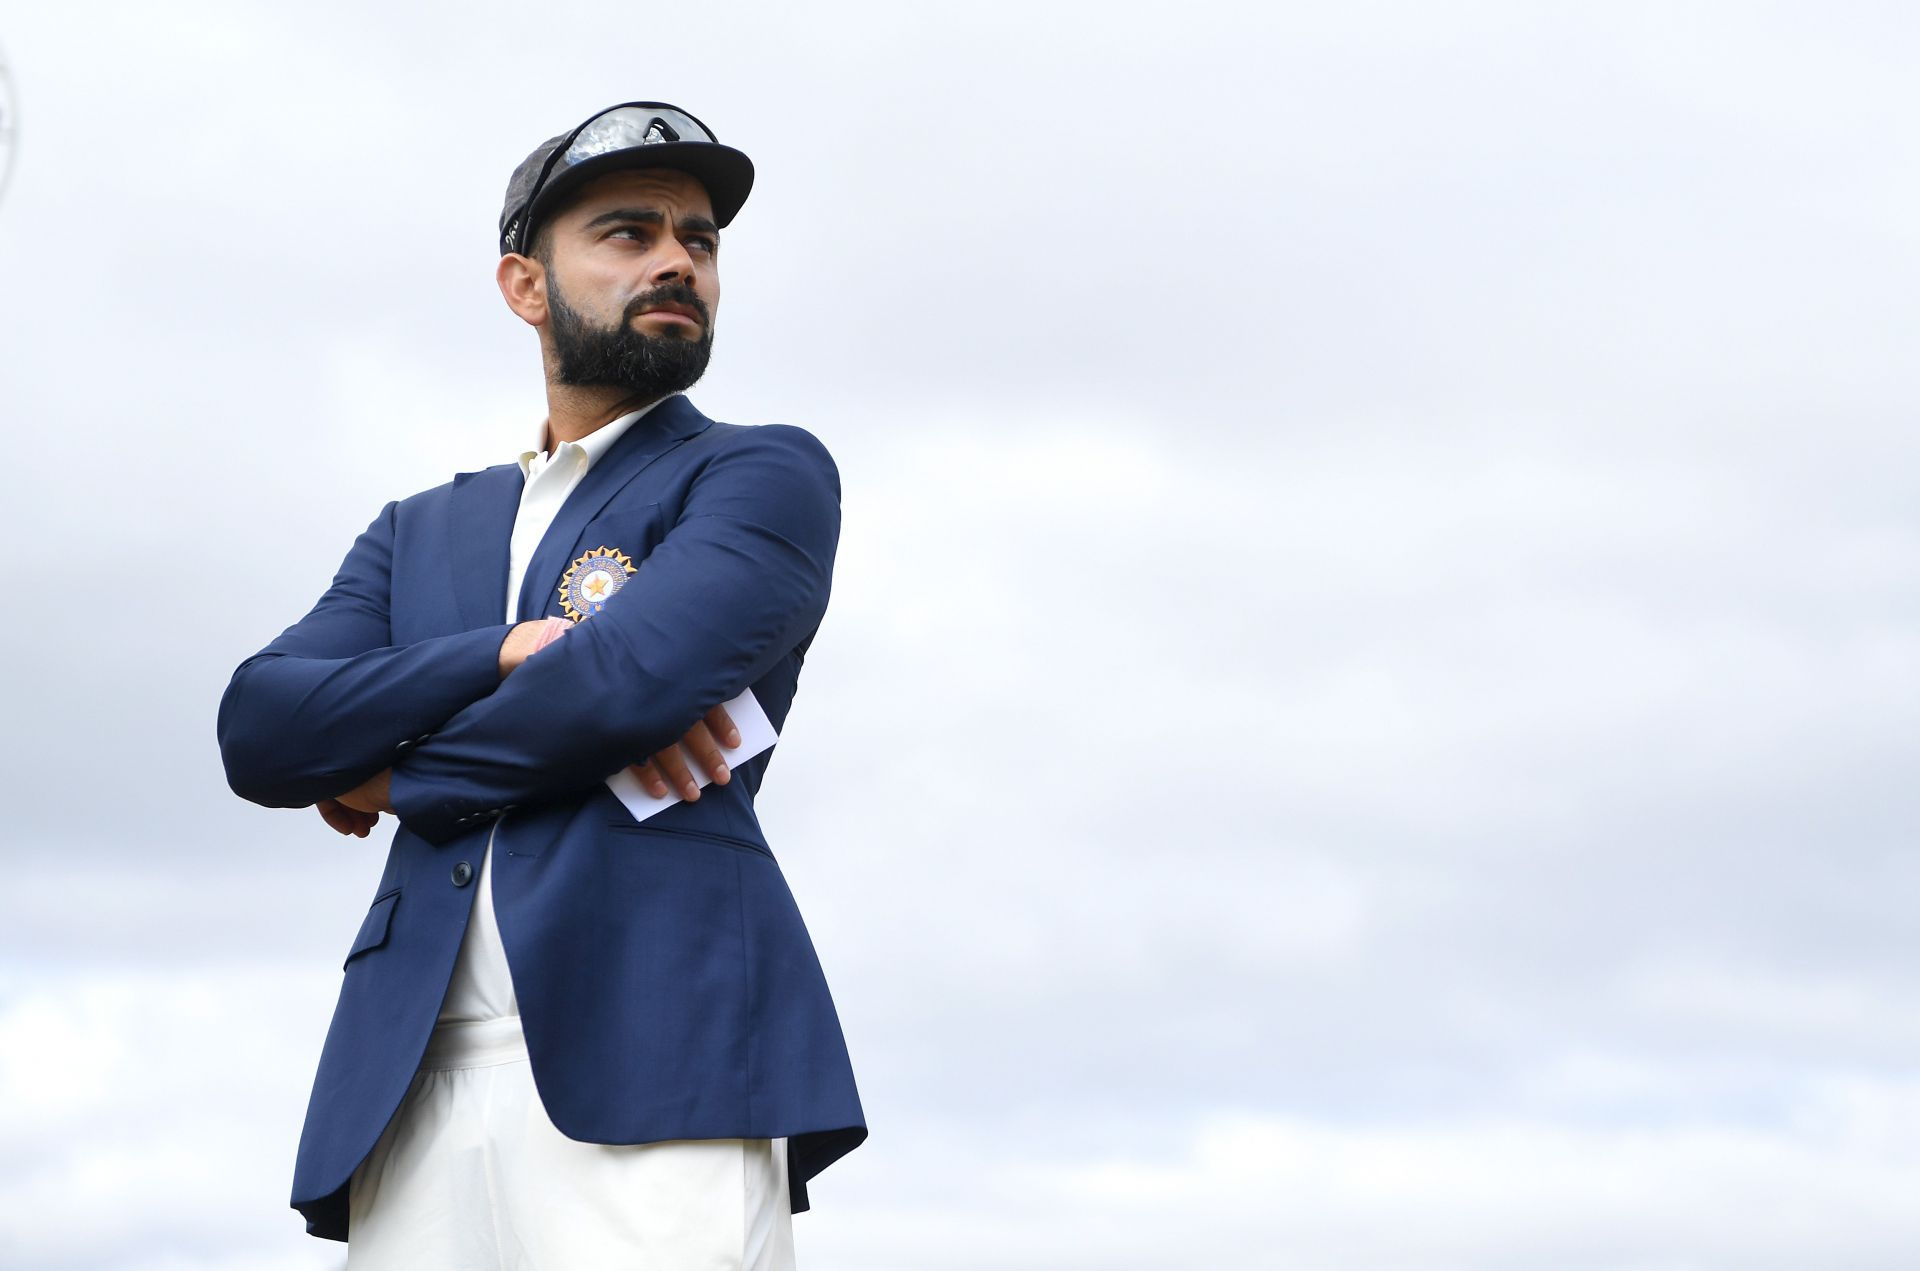 Virat Kohli thinks one should not be attached too much to one thing (Image: Getty)